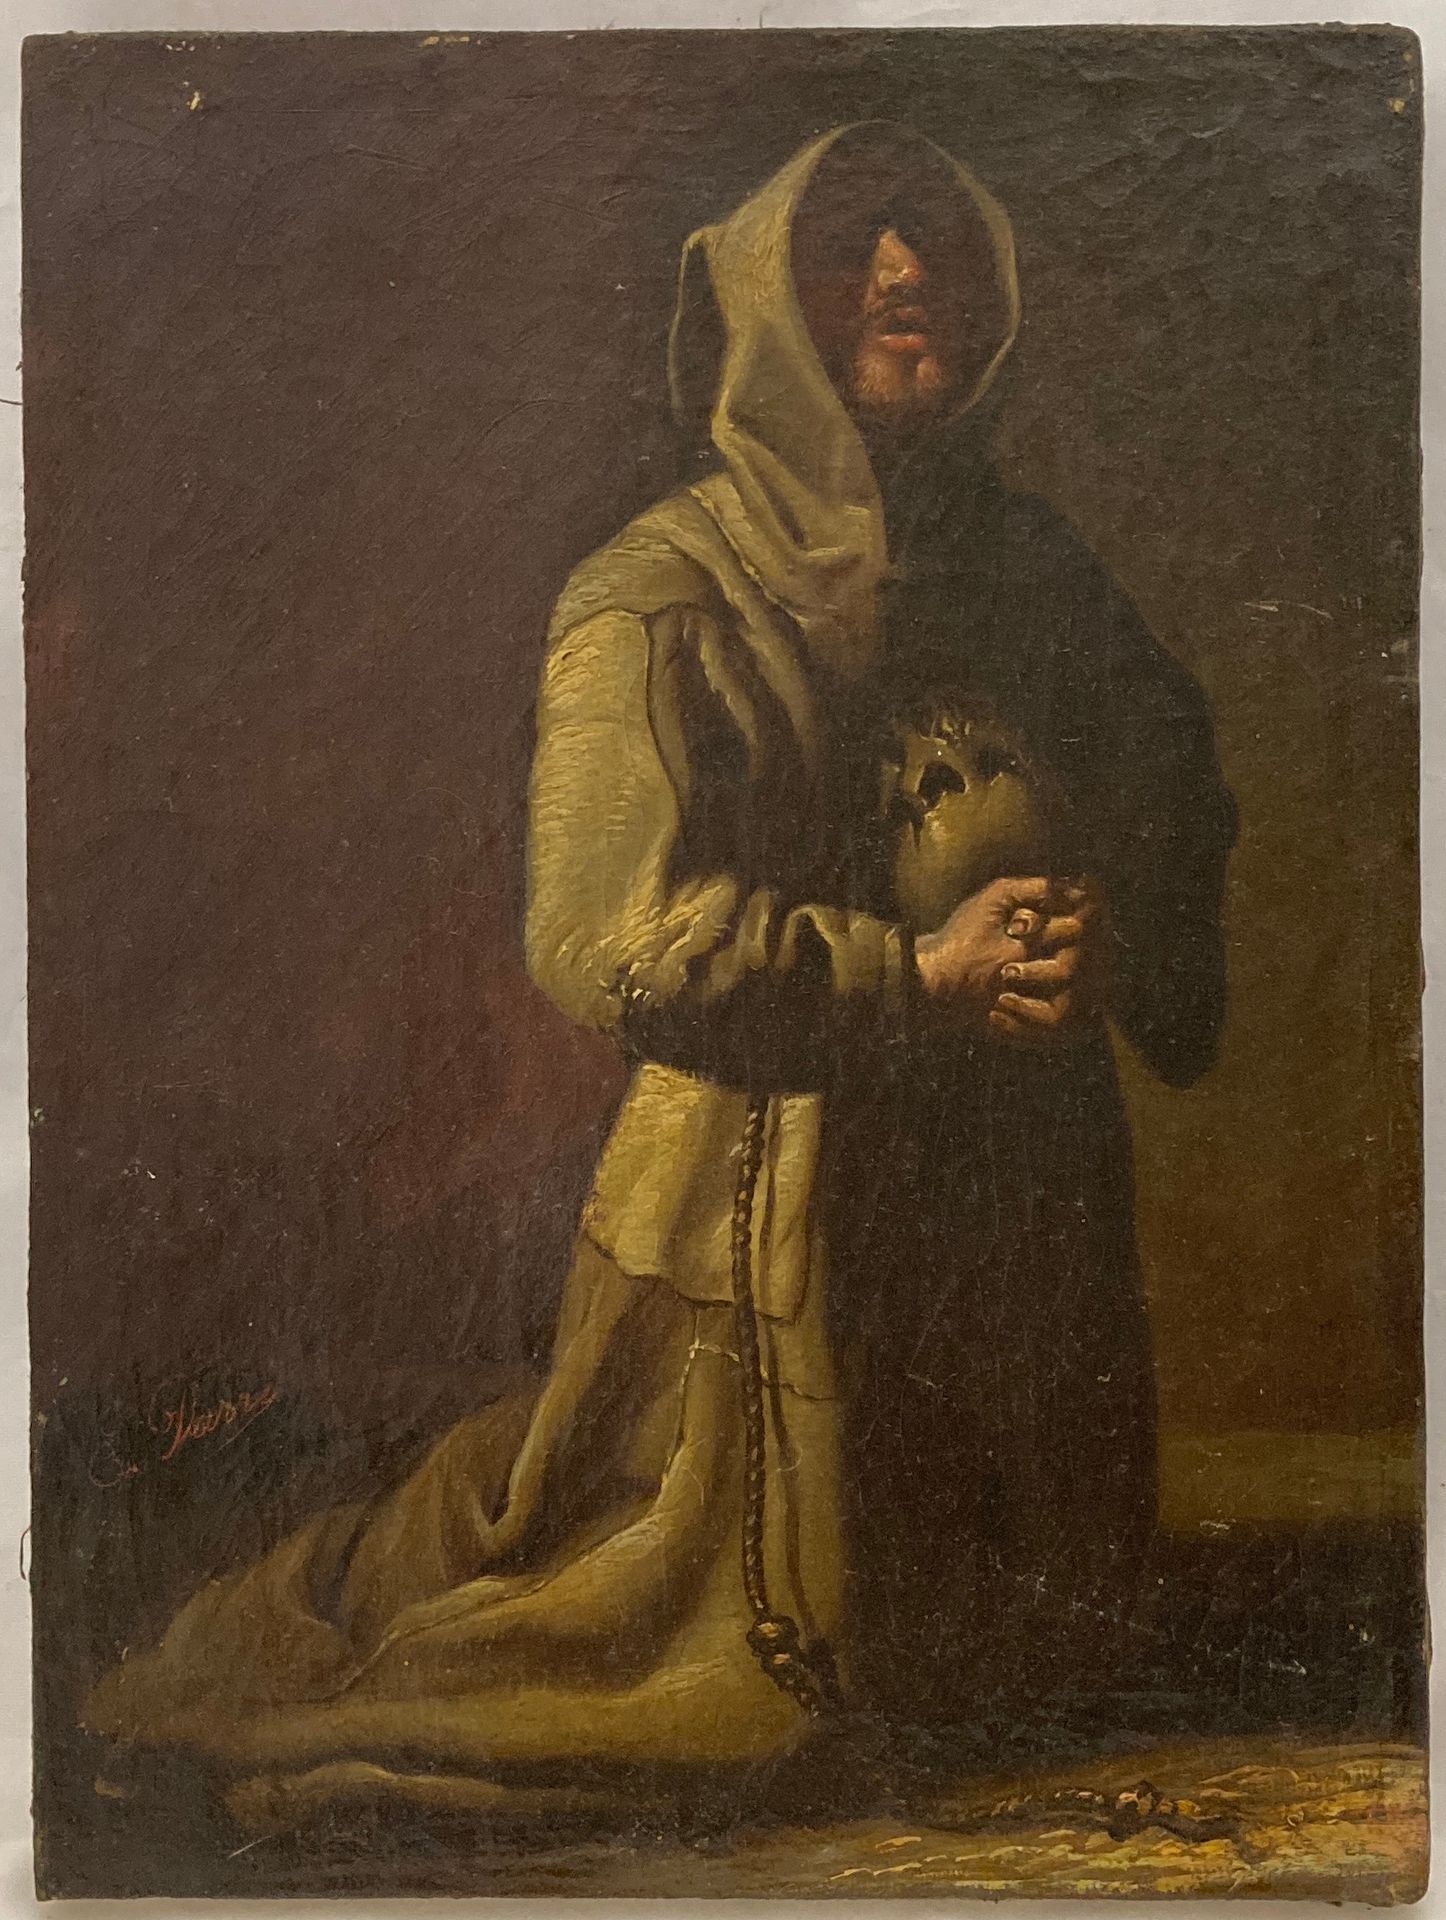 Null E. DARRE, The Penitent Monk, oil on canvas, 19th century, signed lower left&hellip;